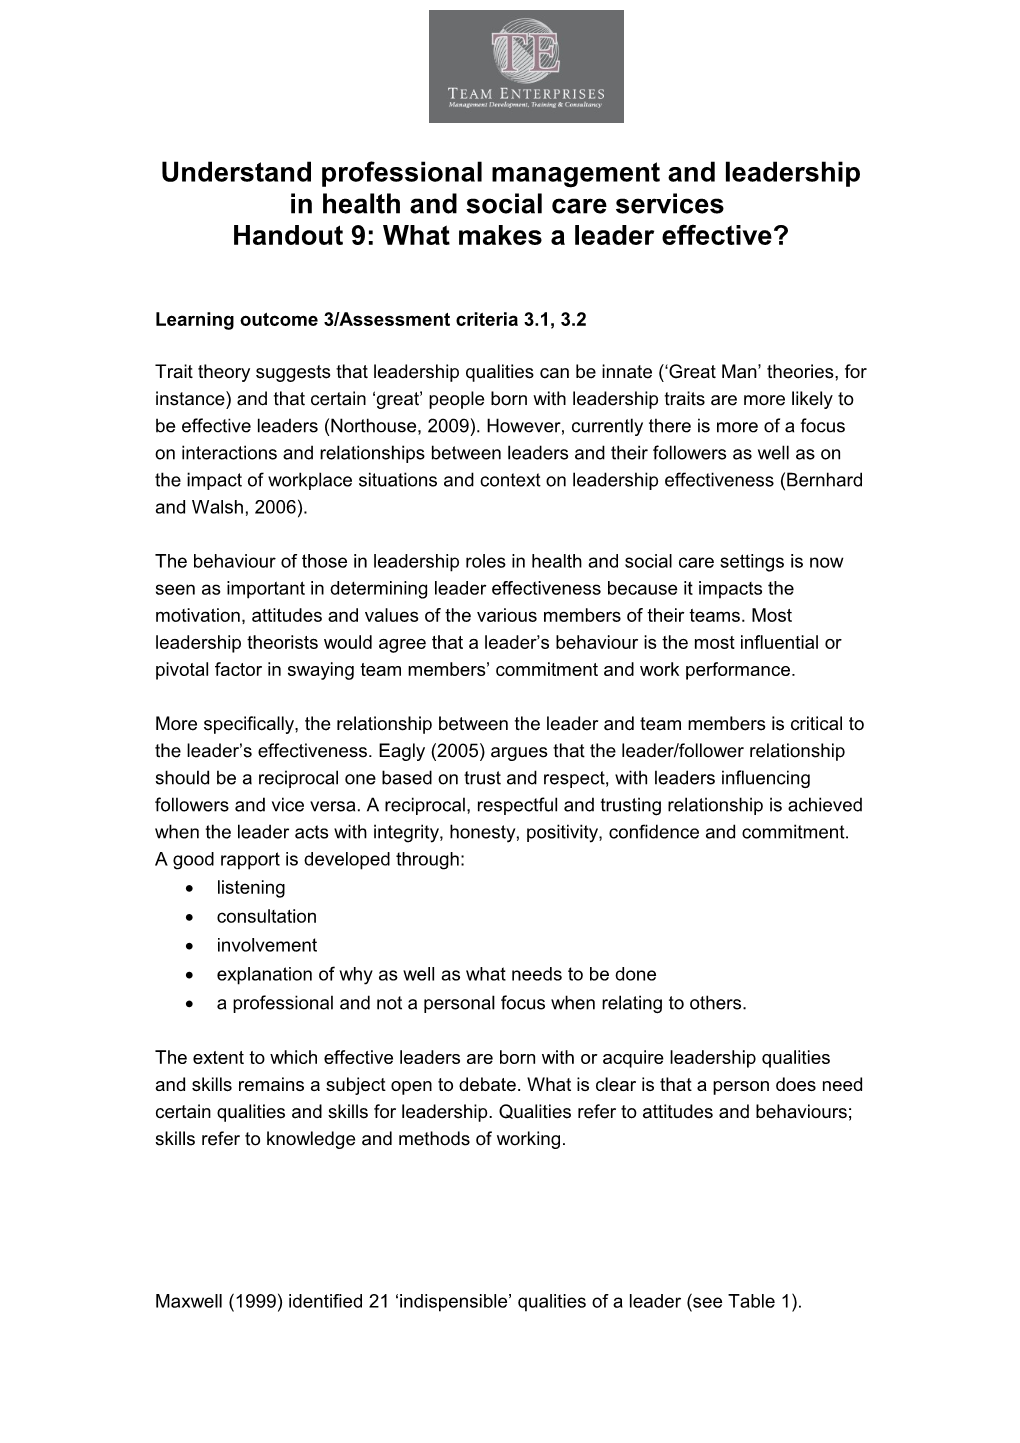 Handout 9: What Makes a Leader Effective?